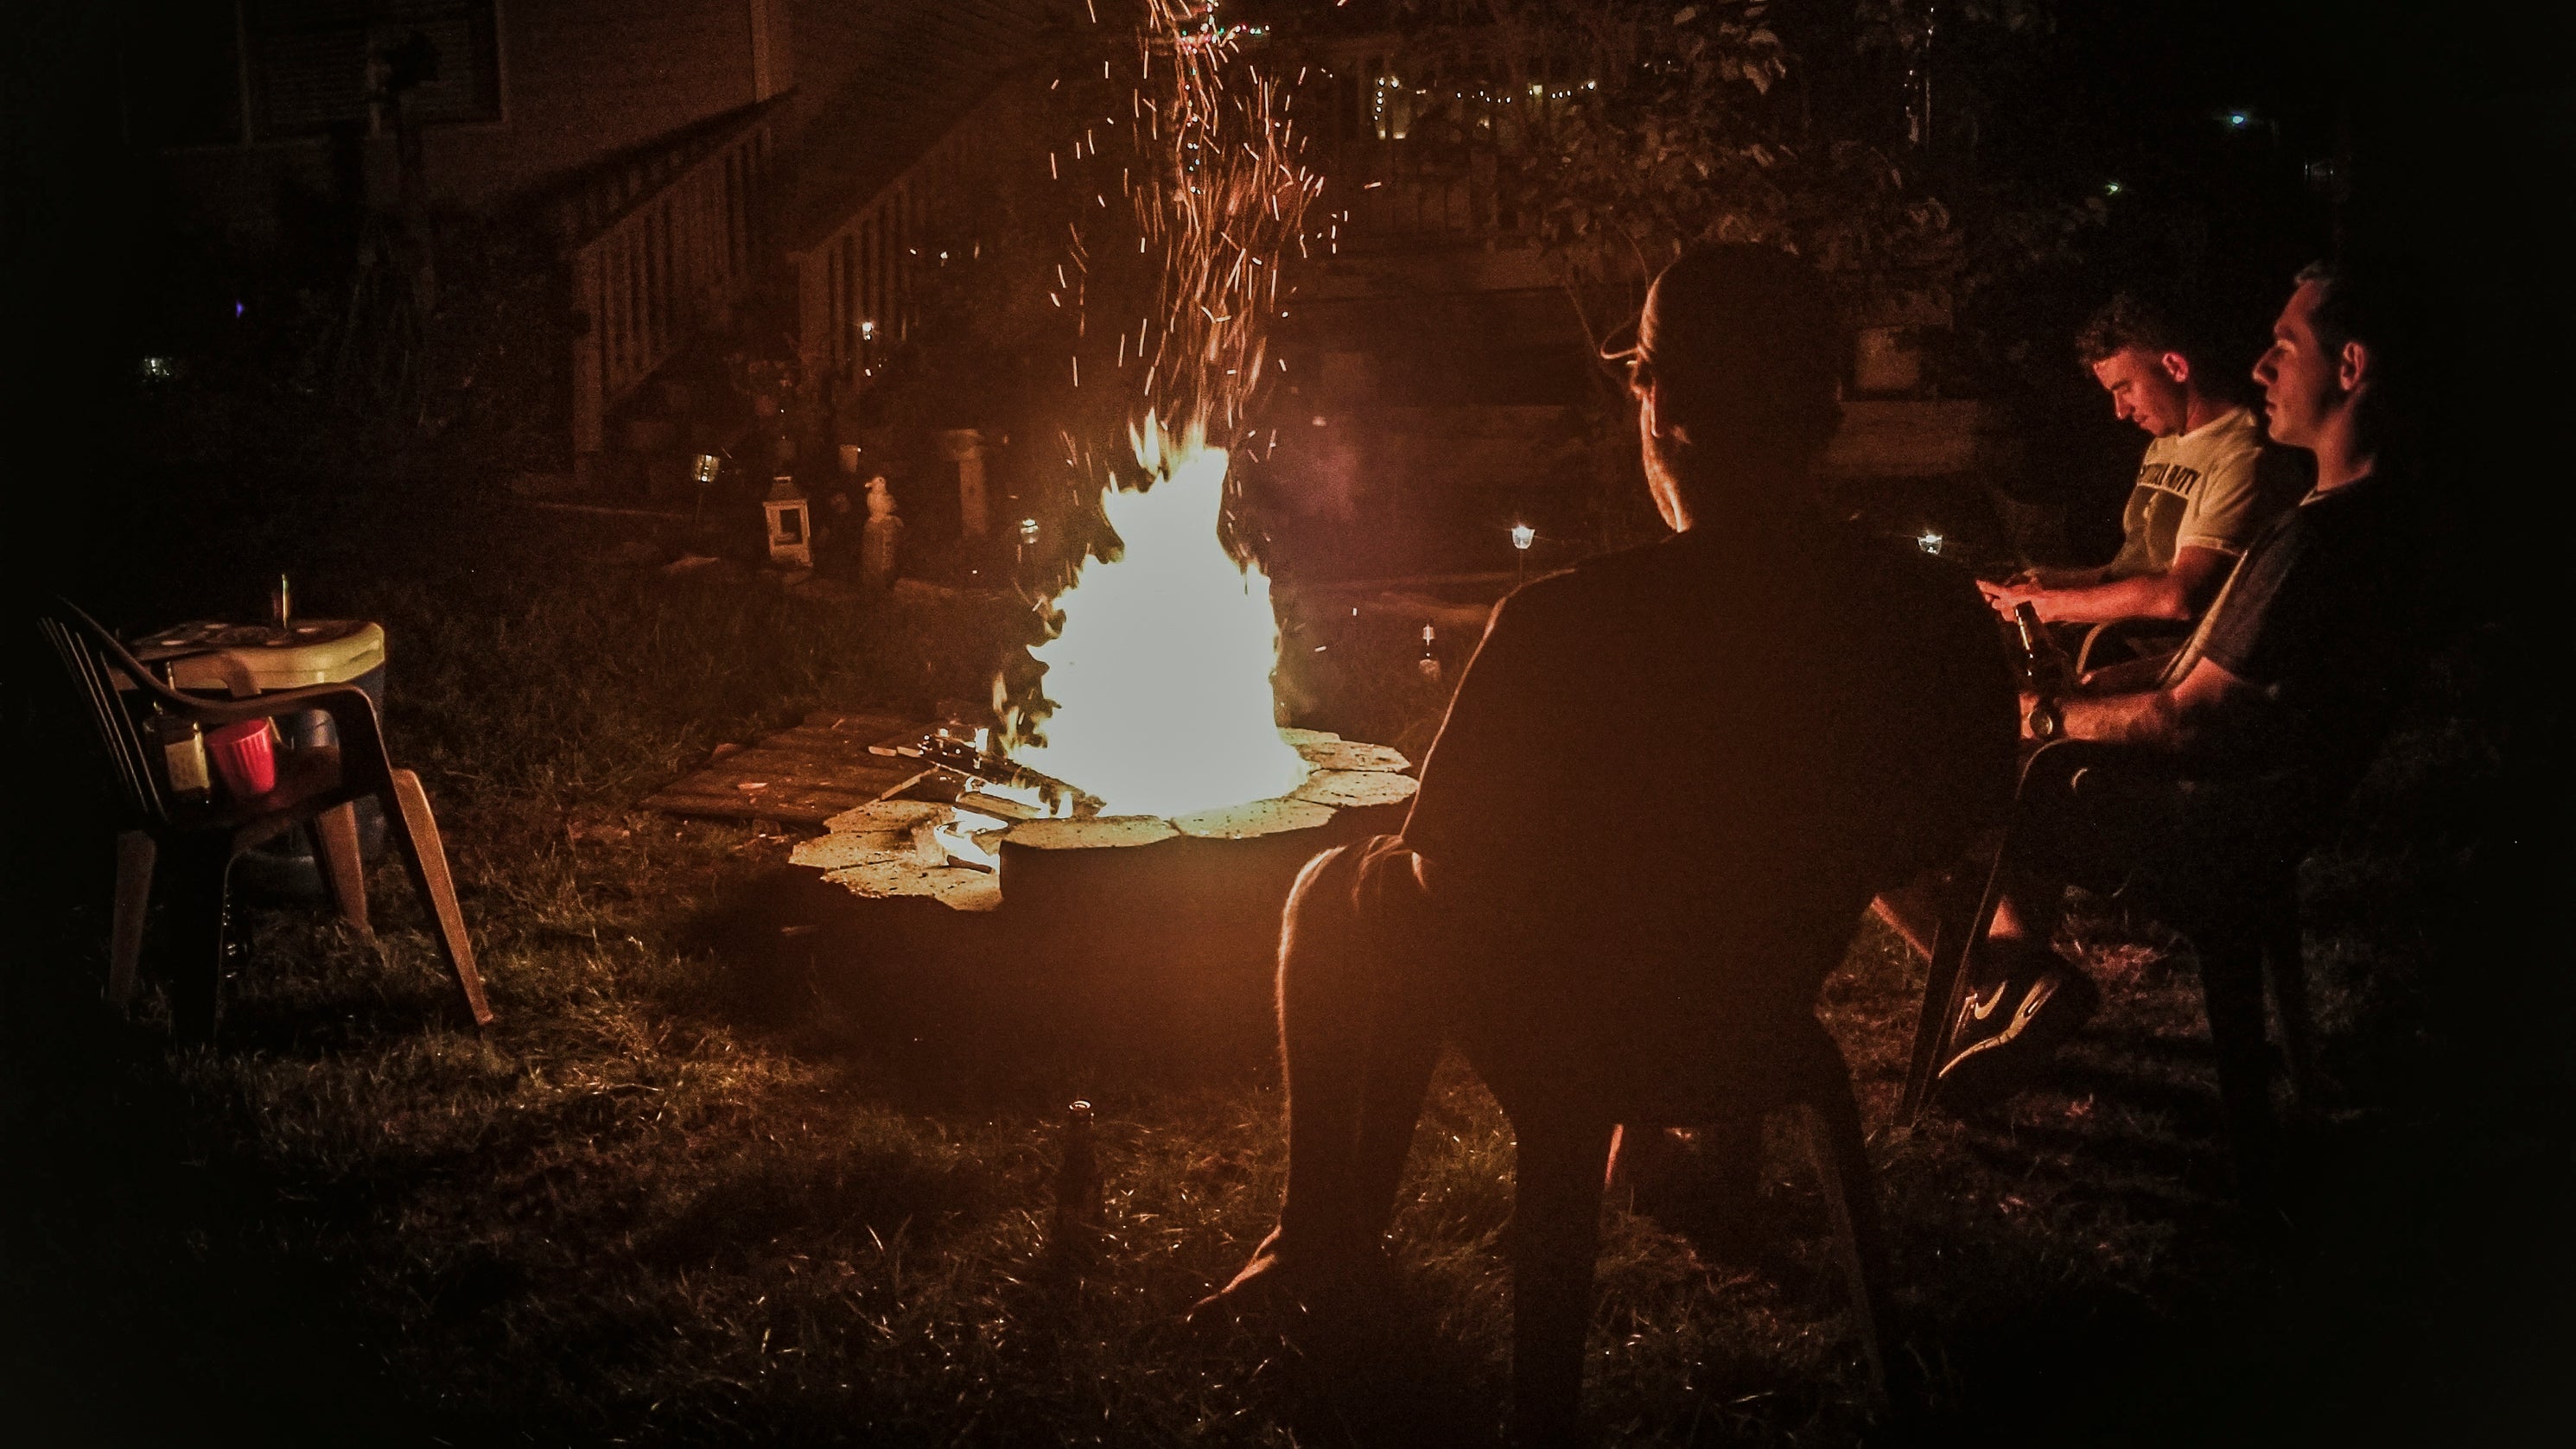 Backyard bonfire with 3 friends sititing around the fire